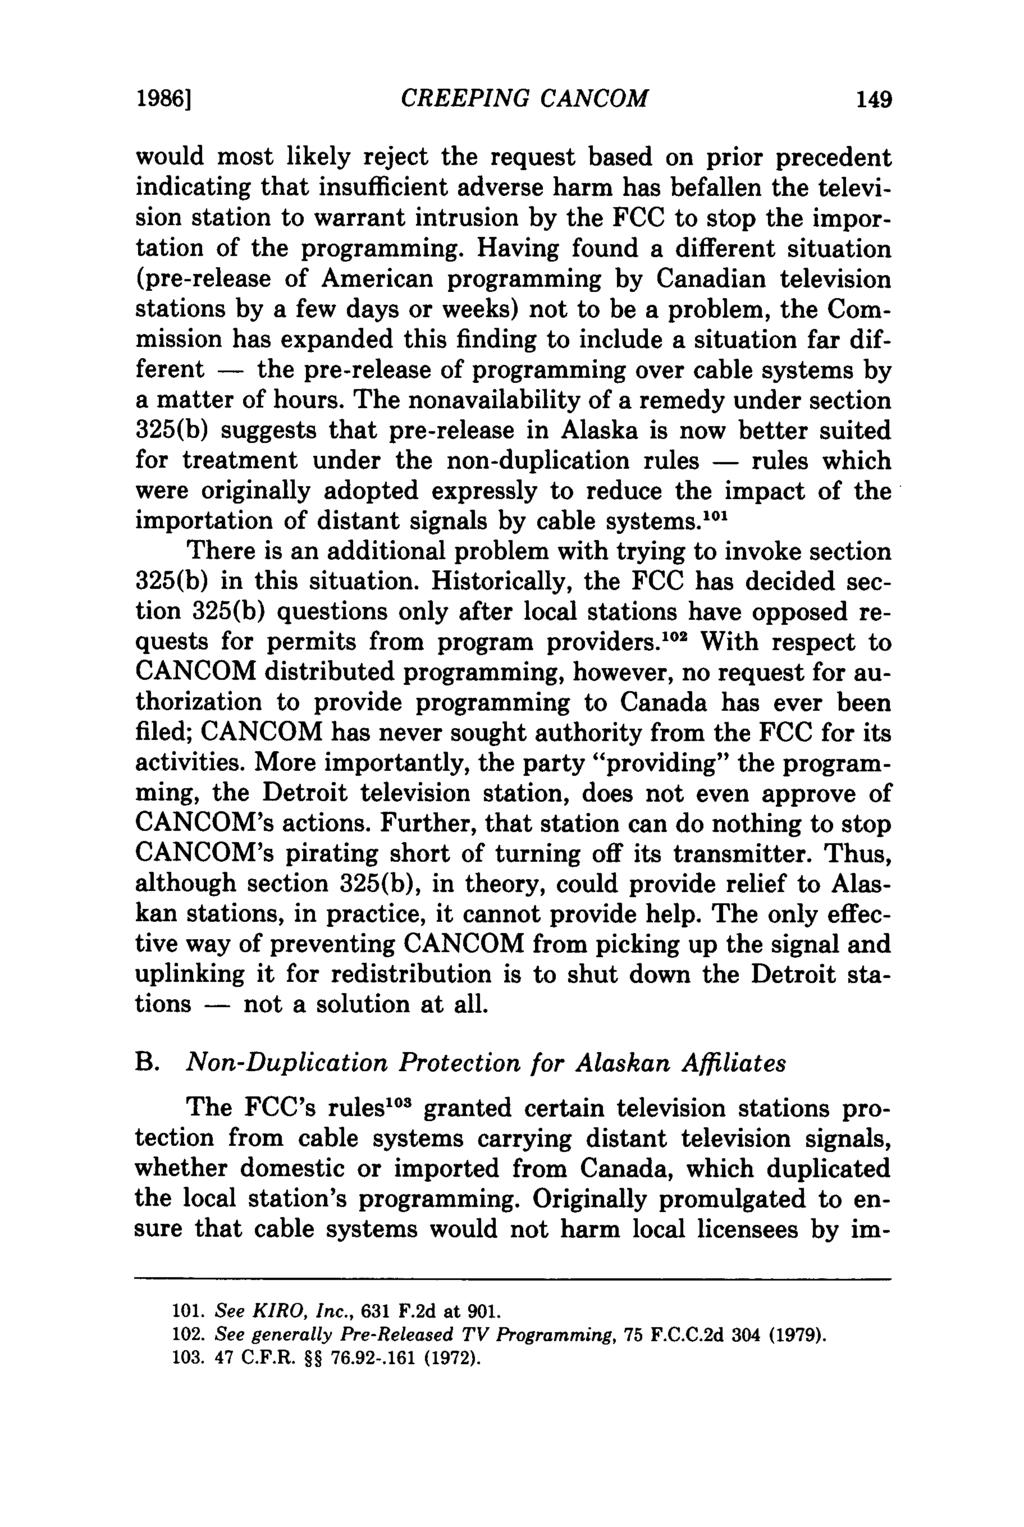 19861 CREEPING CANCOM would most likely reject the request based on prior precedent indicating that insufficient adverse harm has befallen the television station to warrant intrusion by the FCC to